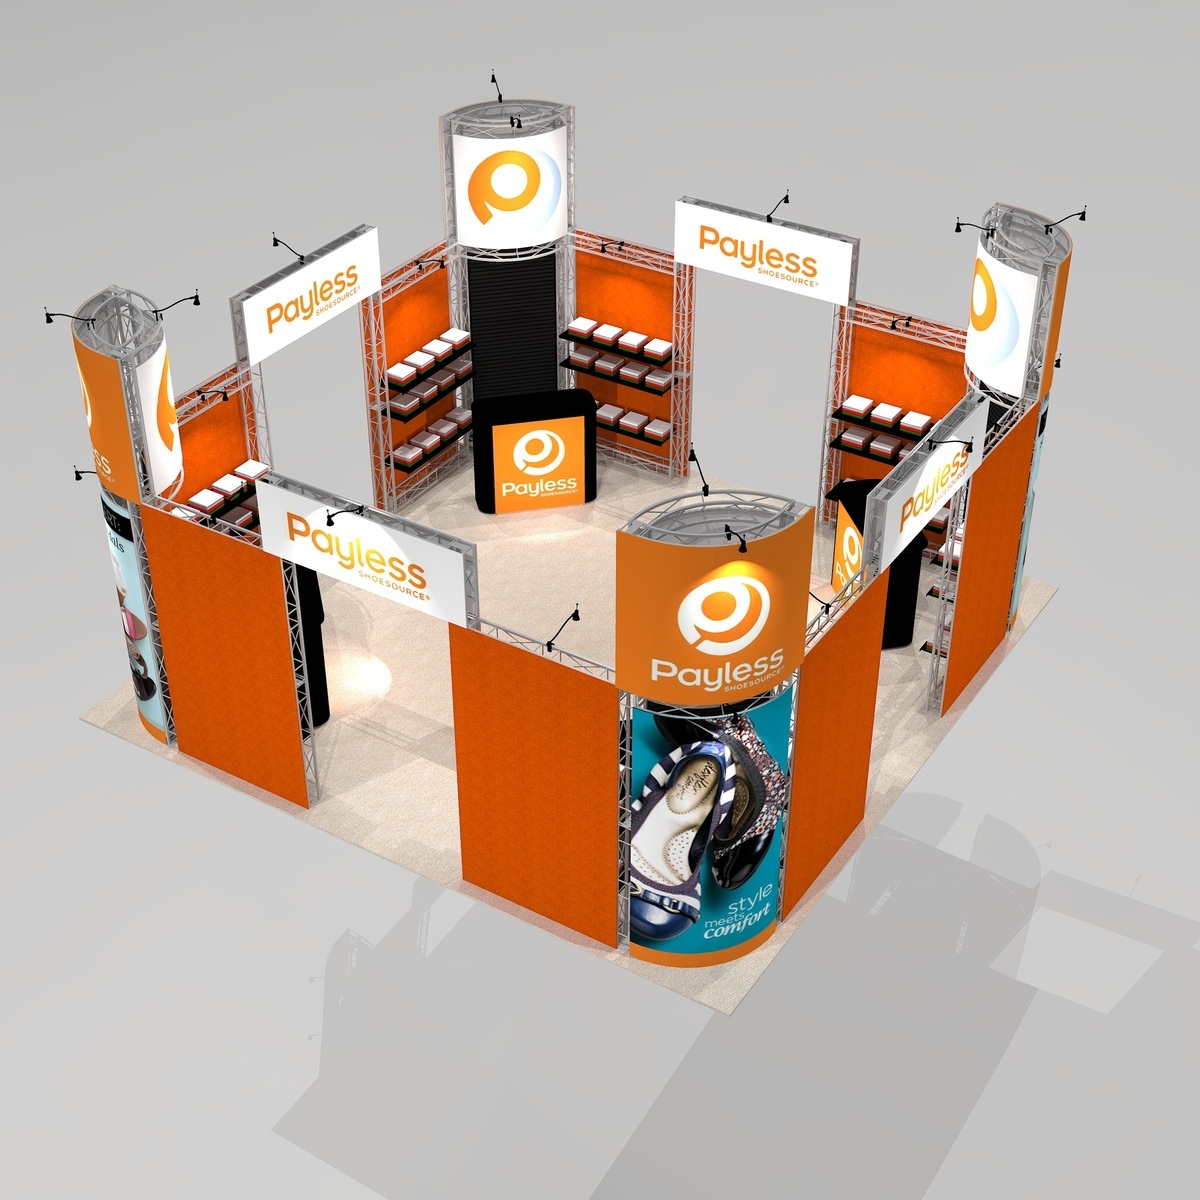 Product Shelving trade show exhibit design EUR2020 Graphic Package B